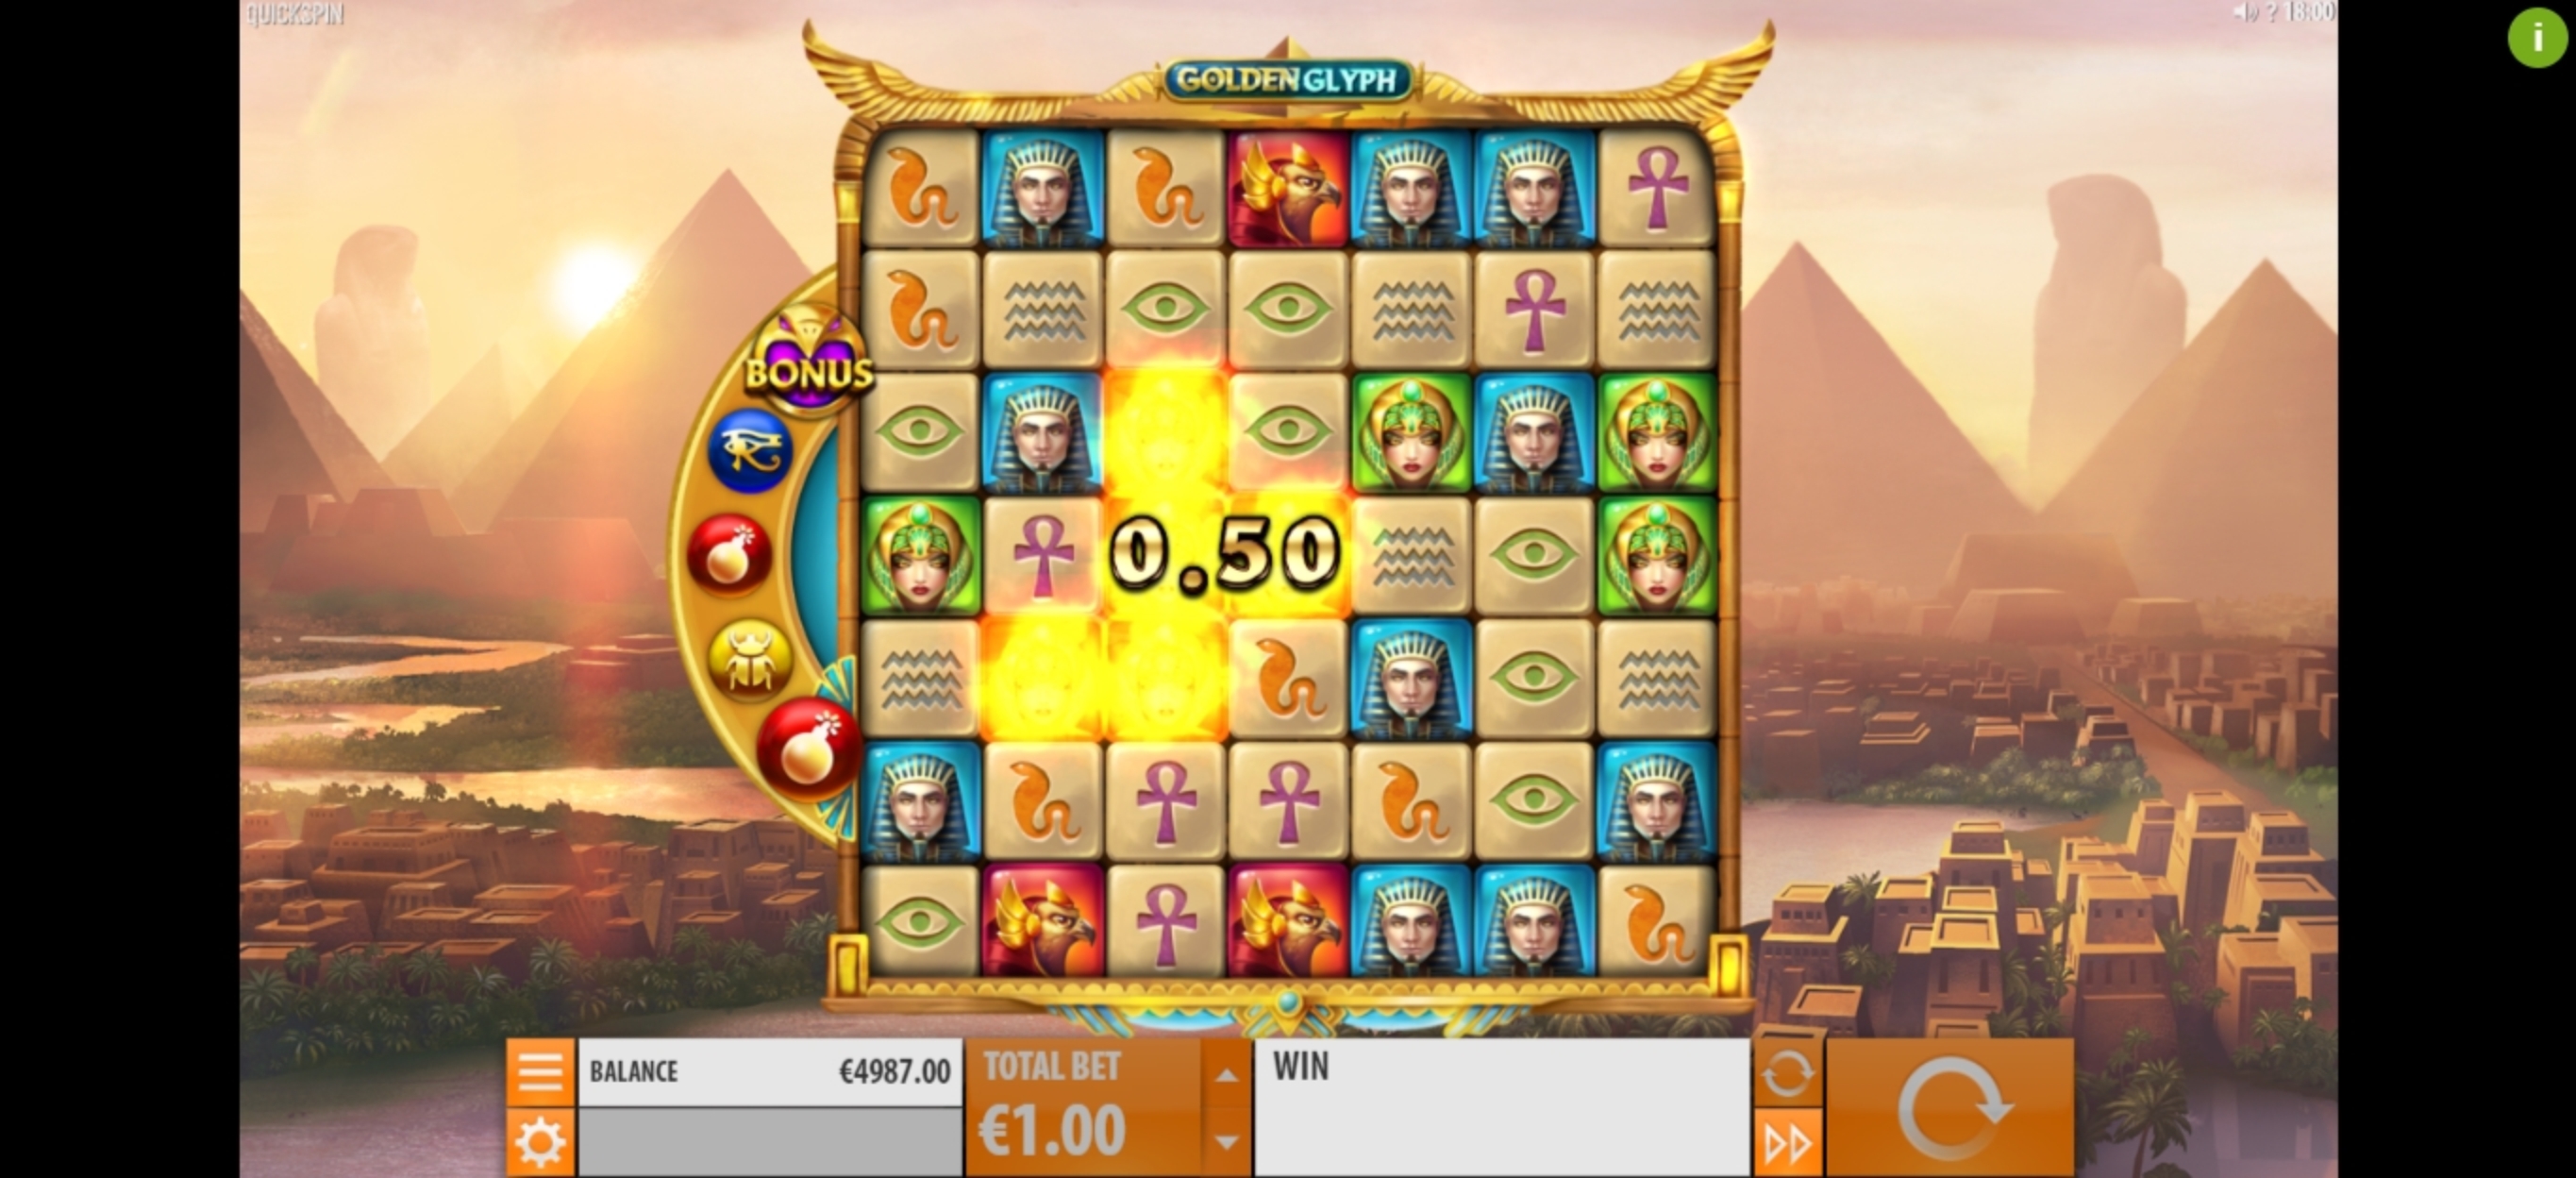 Win Money in Golden Glyph Free Slot Game by Quickspin